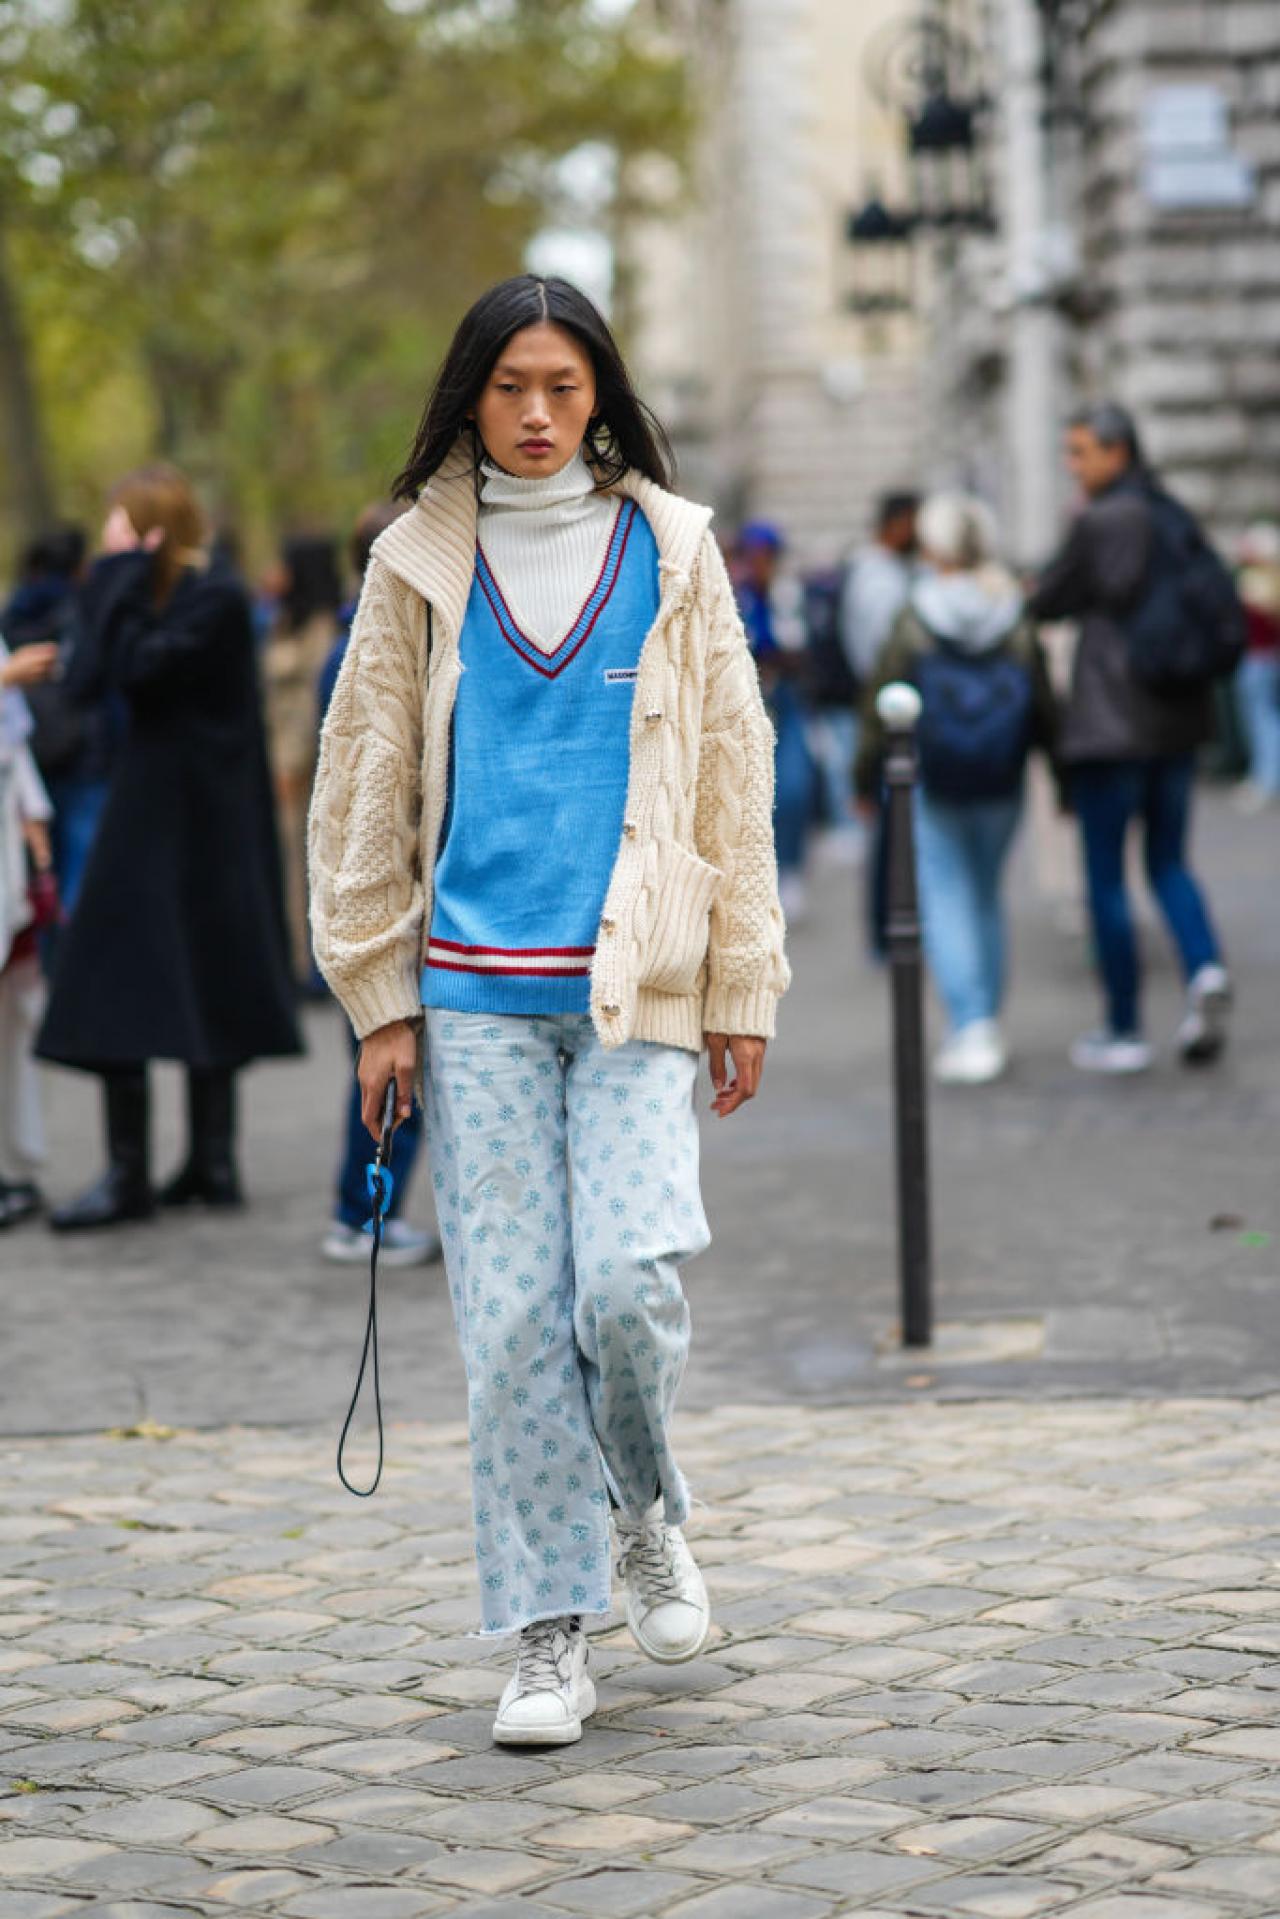 PARIS, FRANCE - OCTOBER 01: A guest wears a white ribbed turtleneck long sleeves t-shirt, a blue wool with red stripes on the collar / V-neck / oversized pullover, a white latte braided wool zipper cardigan, pale blue with blue print flower pattern denim large ripped pants, black and white striped socks, white leather sneakers, outside Loewe, during Paris Fashion Week - Womenswear Spring Summer 2022, on October 01, 2021 in Paris, France. (Photo by Edward Berthelot/Getty Images)